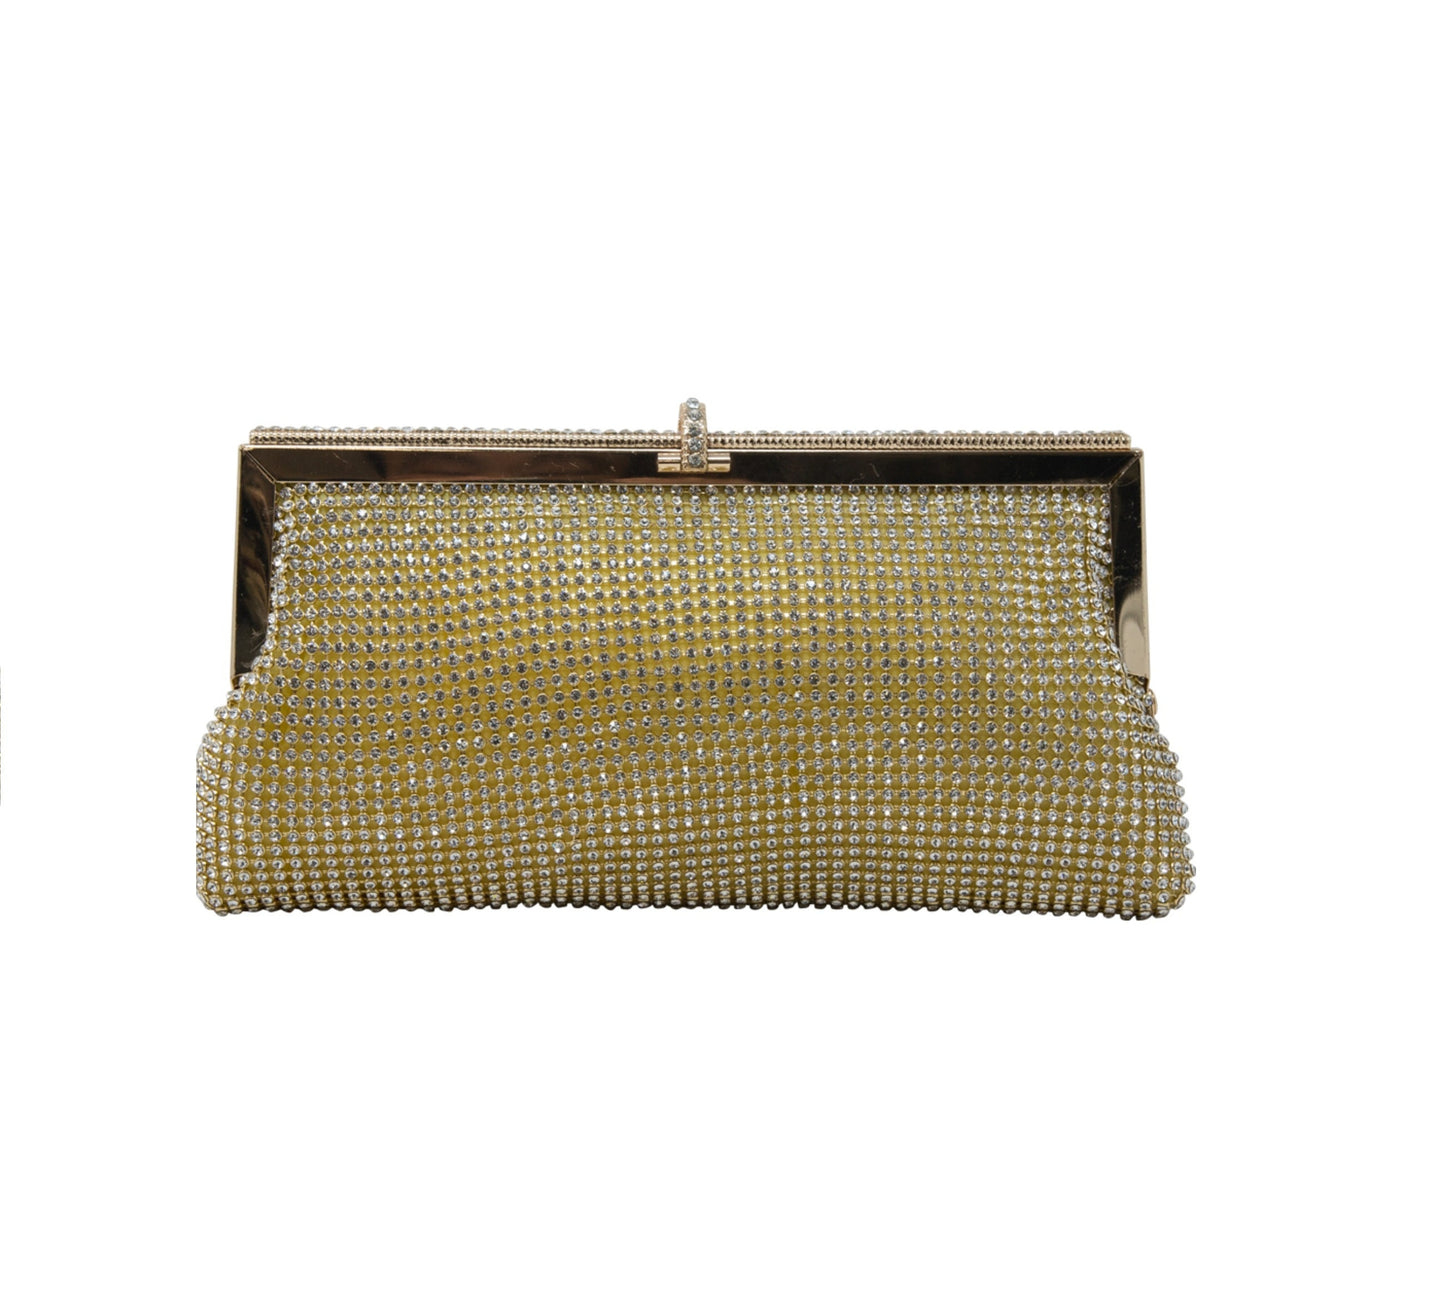 Sparkly Gold Clasp Wedding Event Clutch Bag Shoulder Bag perfect eye-catching Silver Diamante Bridesmaid Gift Present Wedding Party